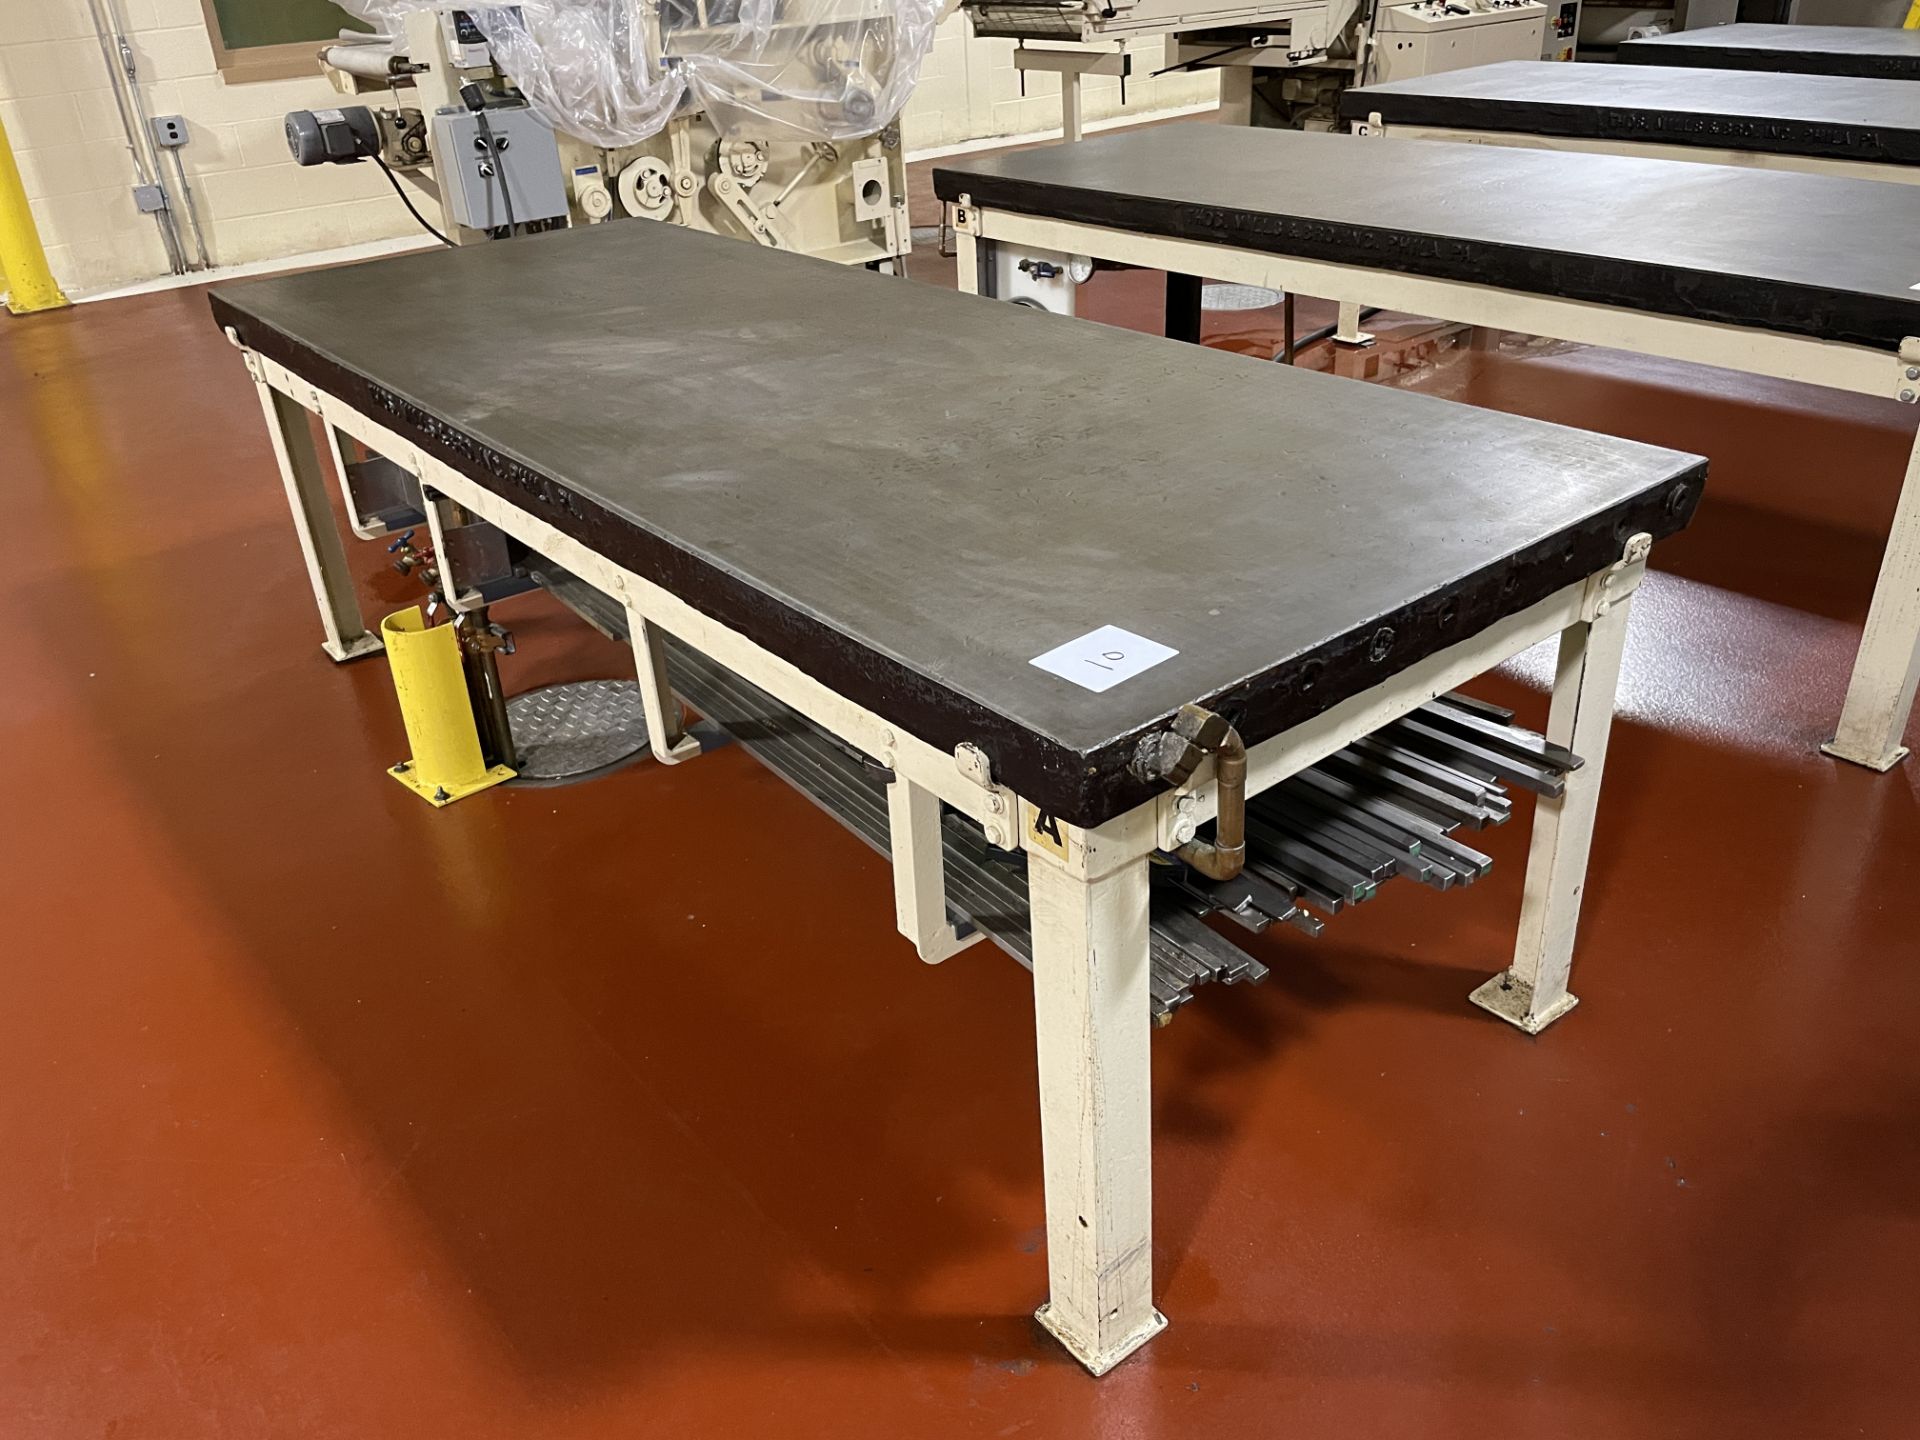 Mills 3 x 8 ft carbon steel water jacketed cold table, 30" tall with lot of bars, with mixing